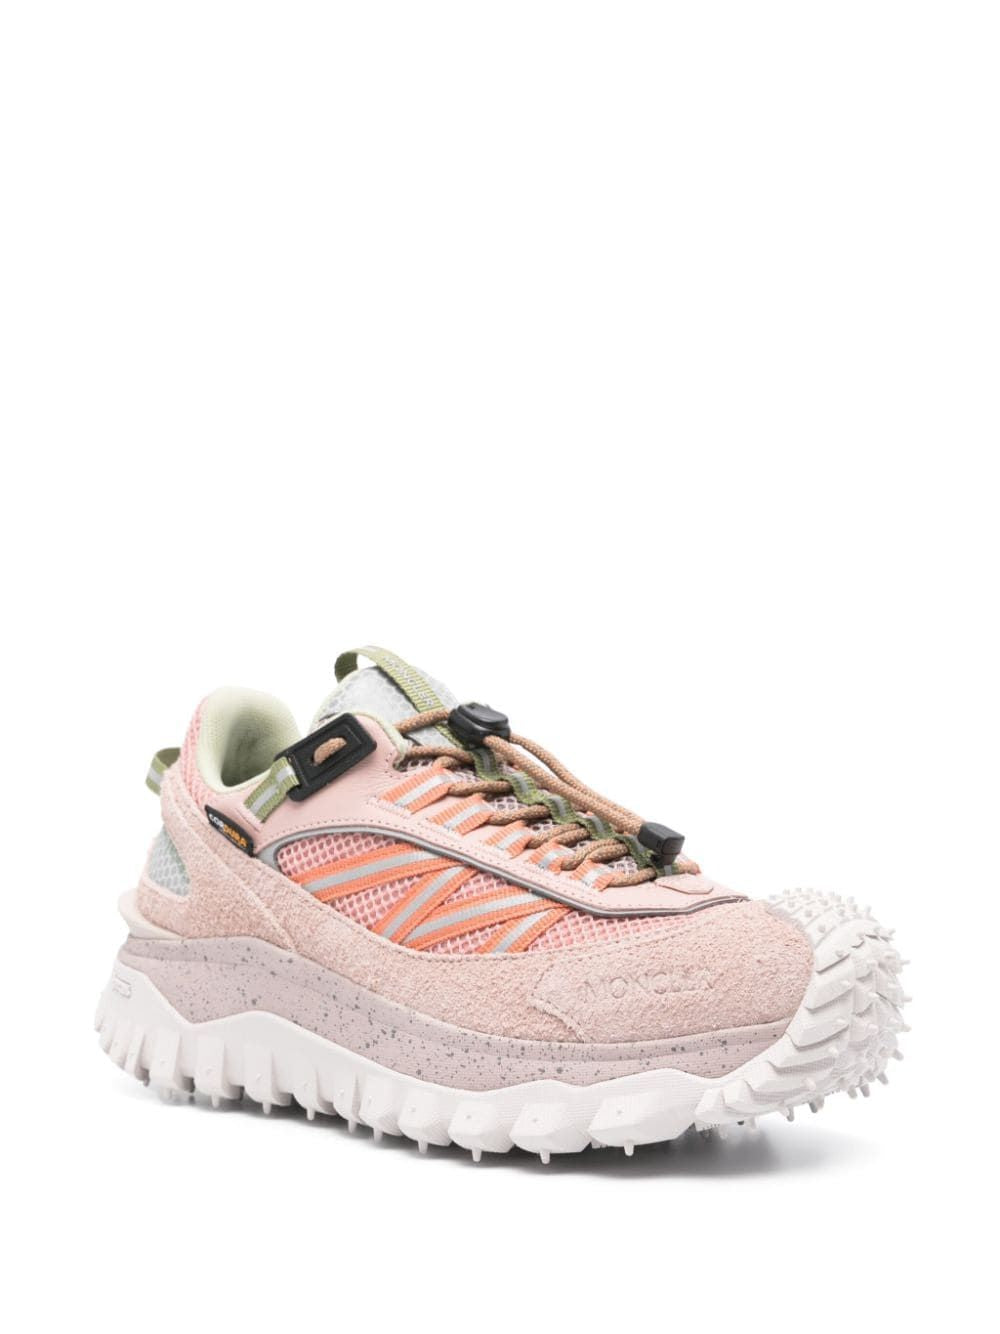 MONCLER Pink Trailgrip Sneakers for Women with Vibram Sole